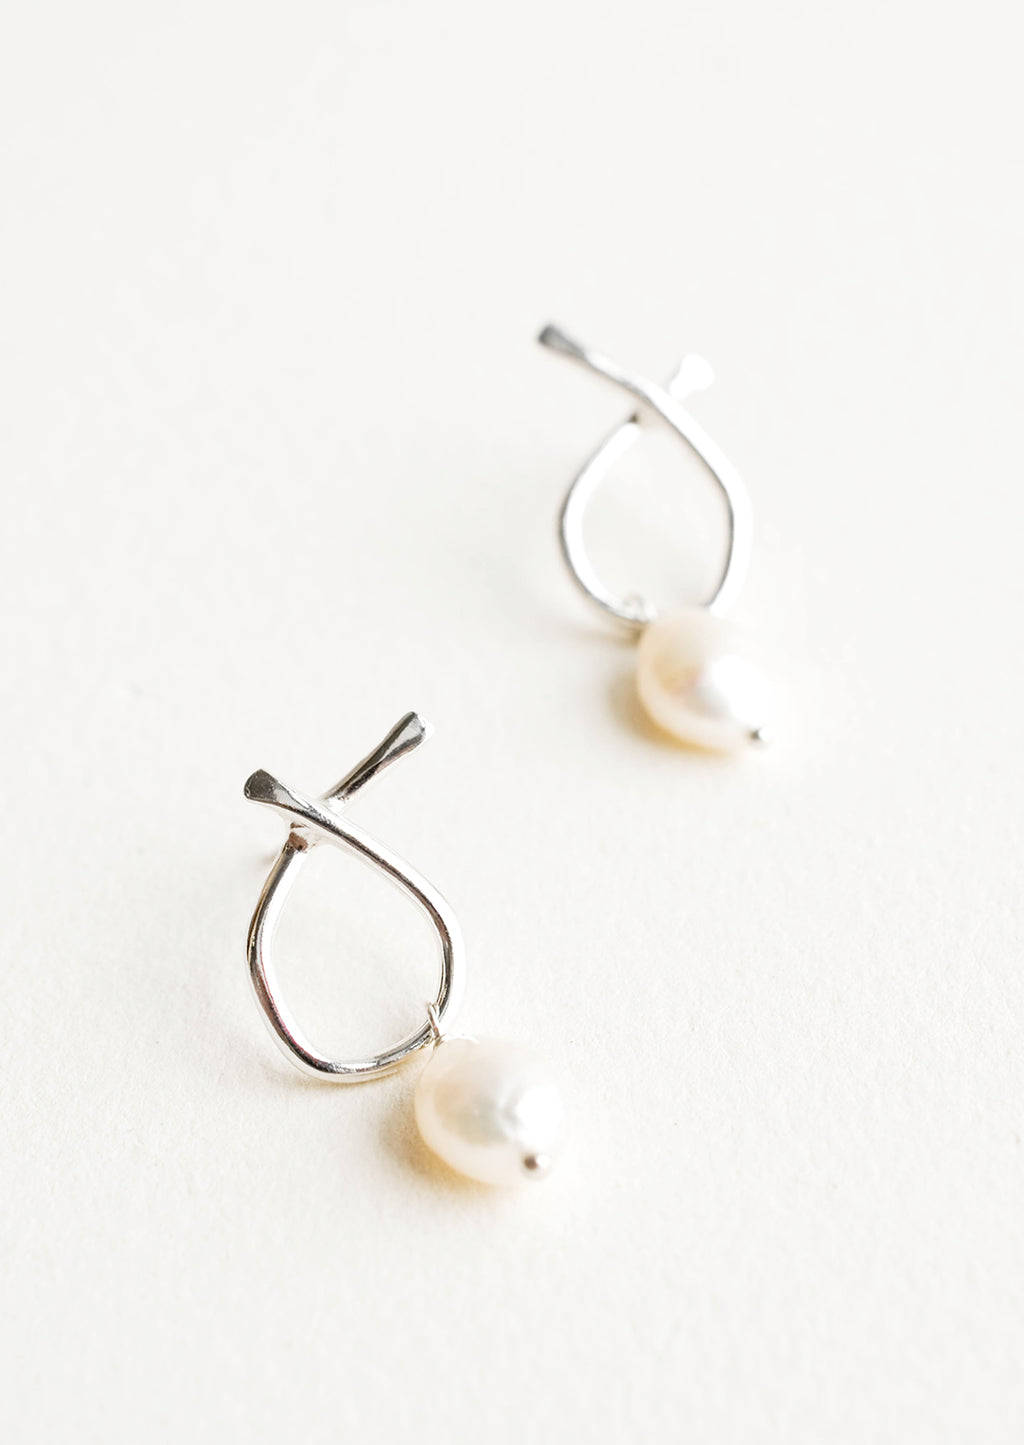 Sterling Silver: Pair of silver earrings featuring a slim asymmetrical frame on a post back and dangling pearl.